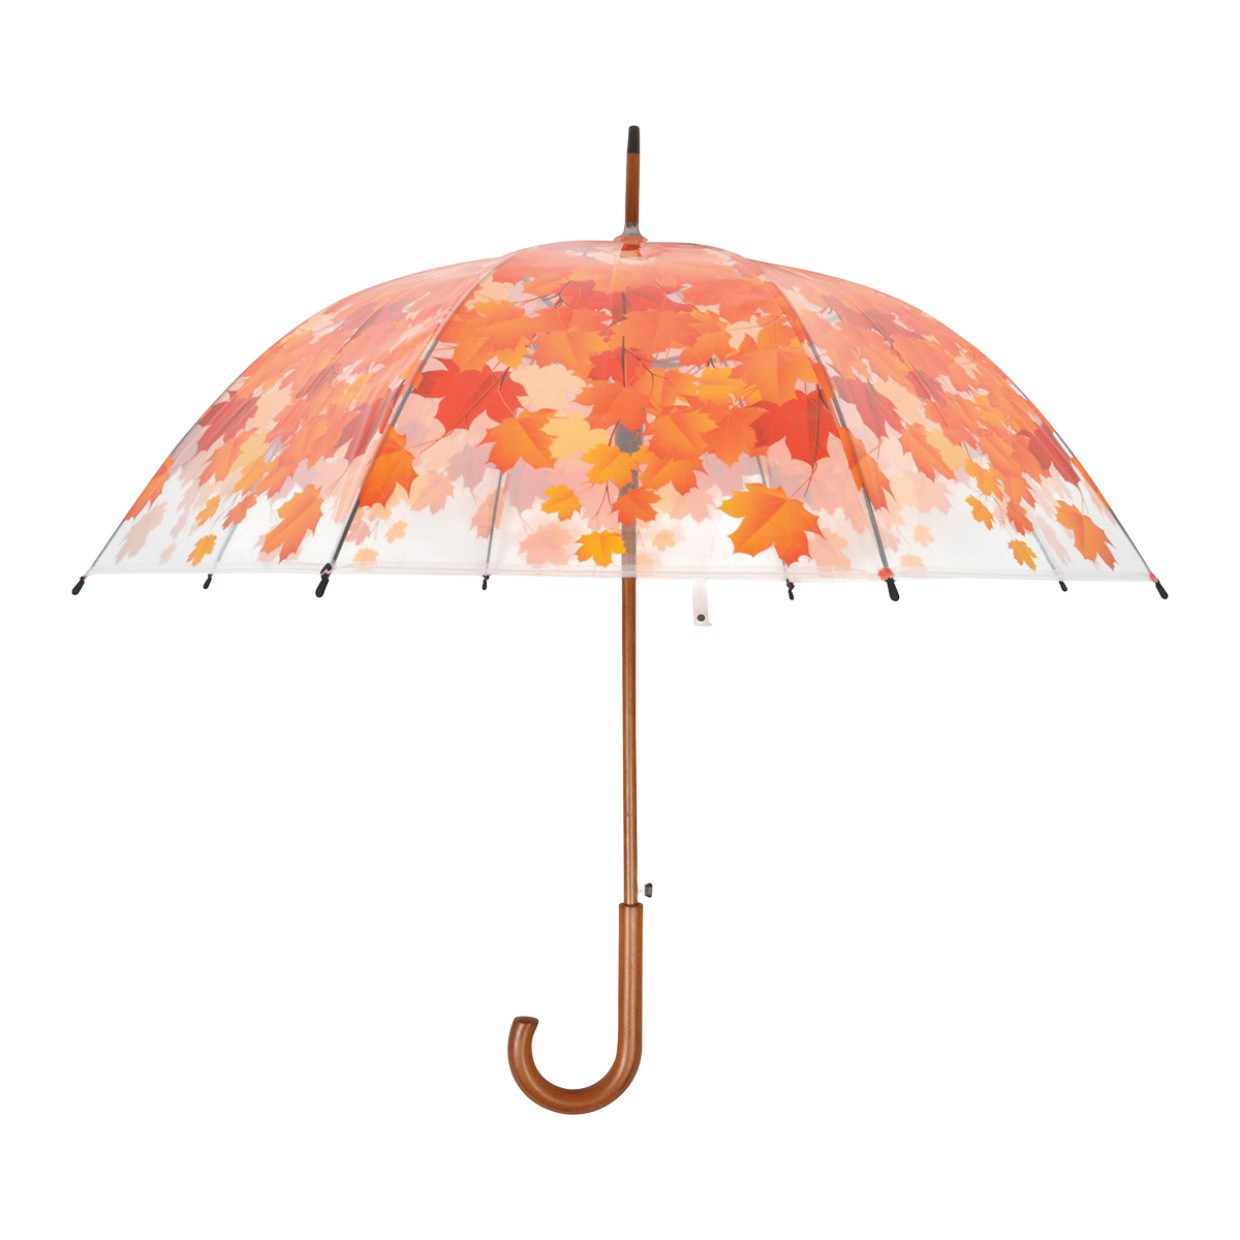 Parapluie Feuilles d'automne, MADE IN CHASSE - Equipements de chasse